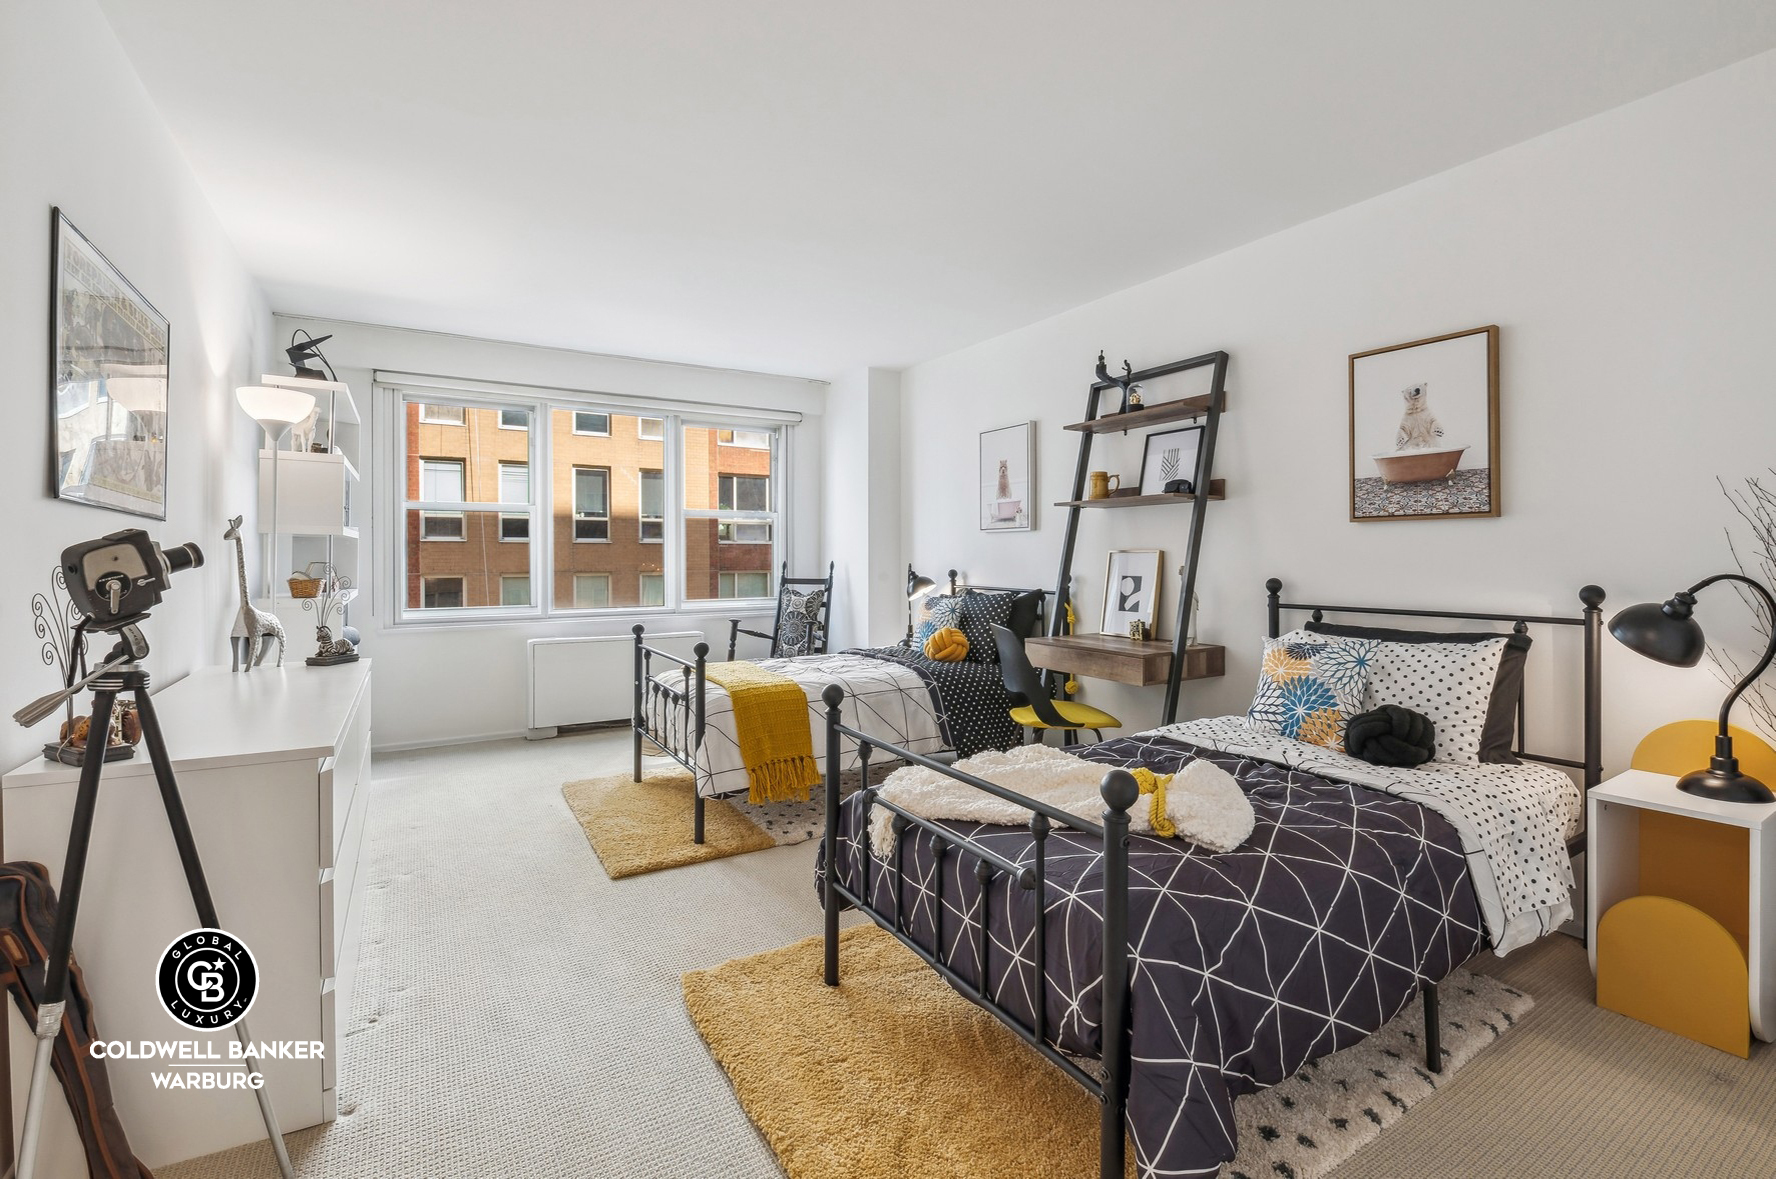 201 E 79th Street Unit 6H, New York, New York, 10075, United States, 2 Bedrooms Bedrooms, ,2 BathroomsBathrooms,Residential,For Sale,201 E 79th Street Unit 6H,1385294